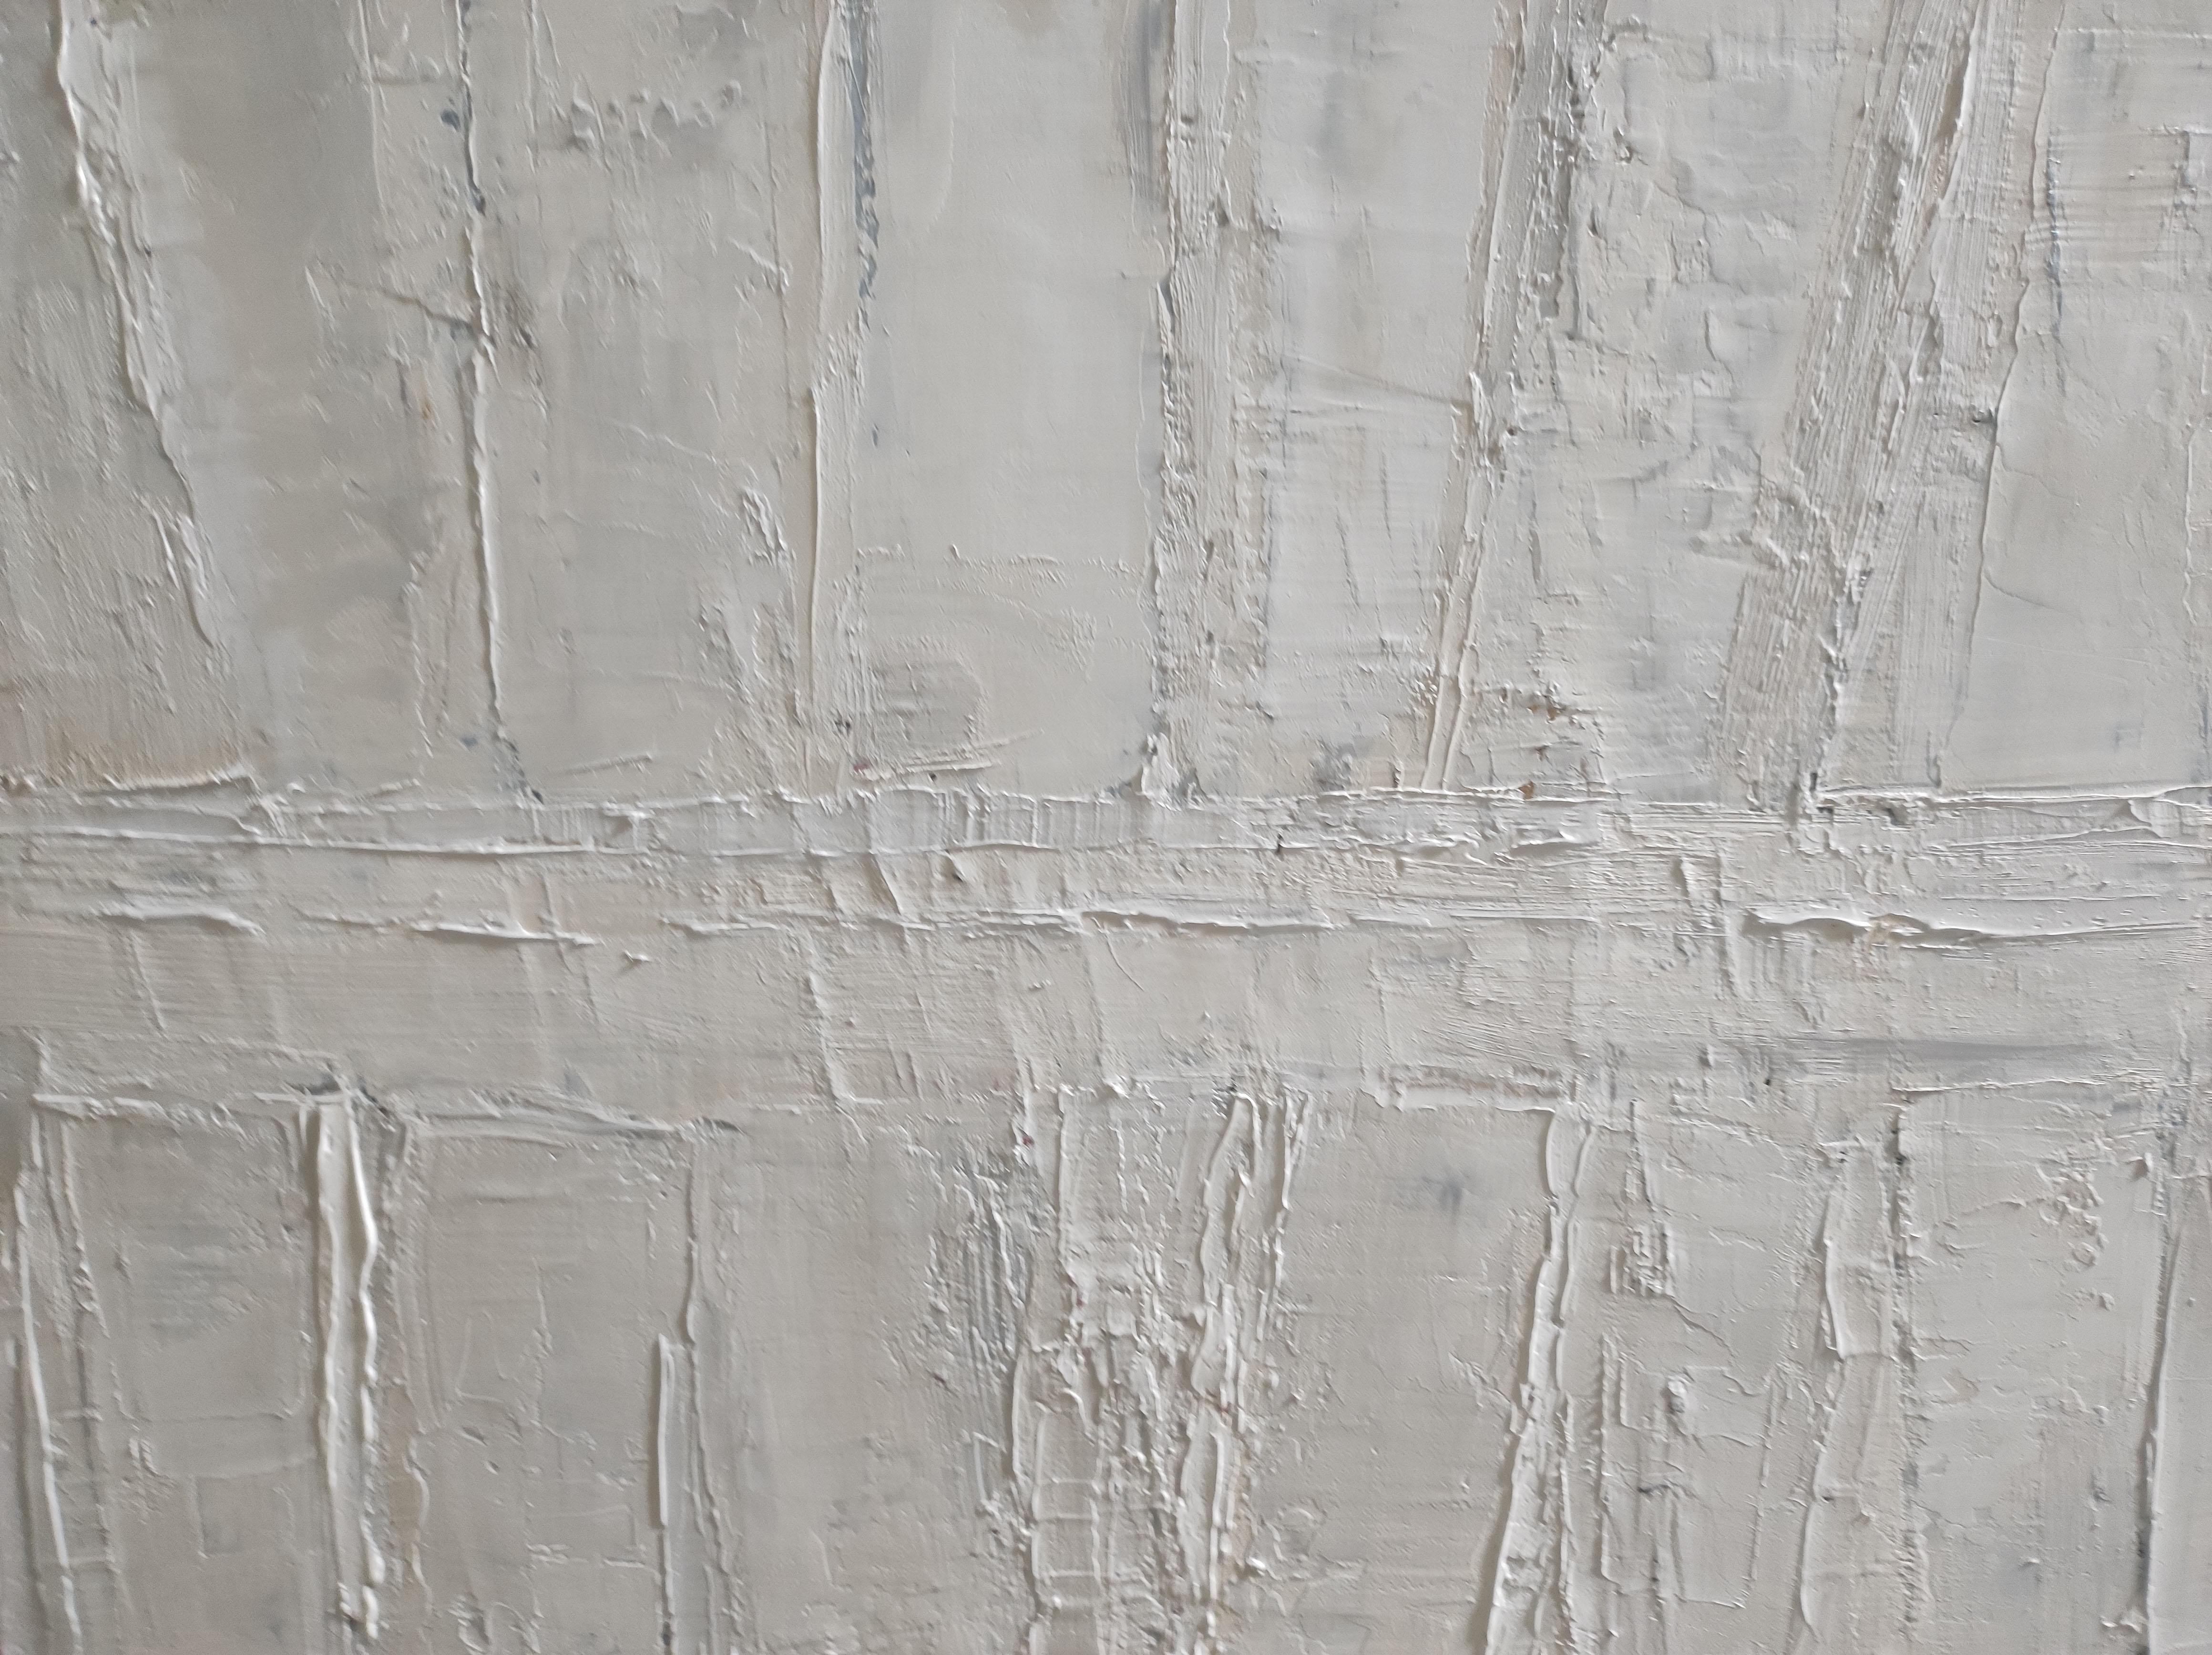 sans un mot, oil on canvas, white abstract , monochrome, minimalism, library  - Gray Abstract Painting by SOPHIE DUMONT